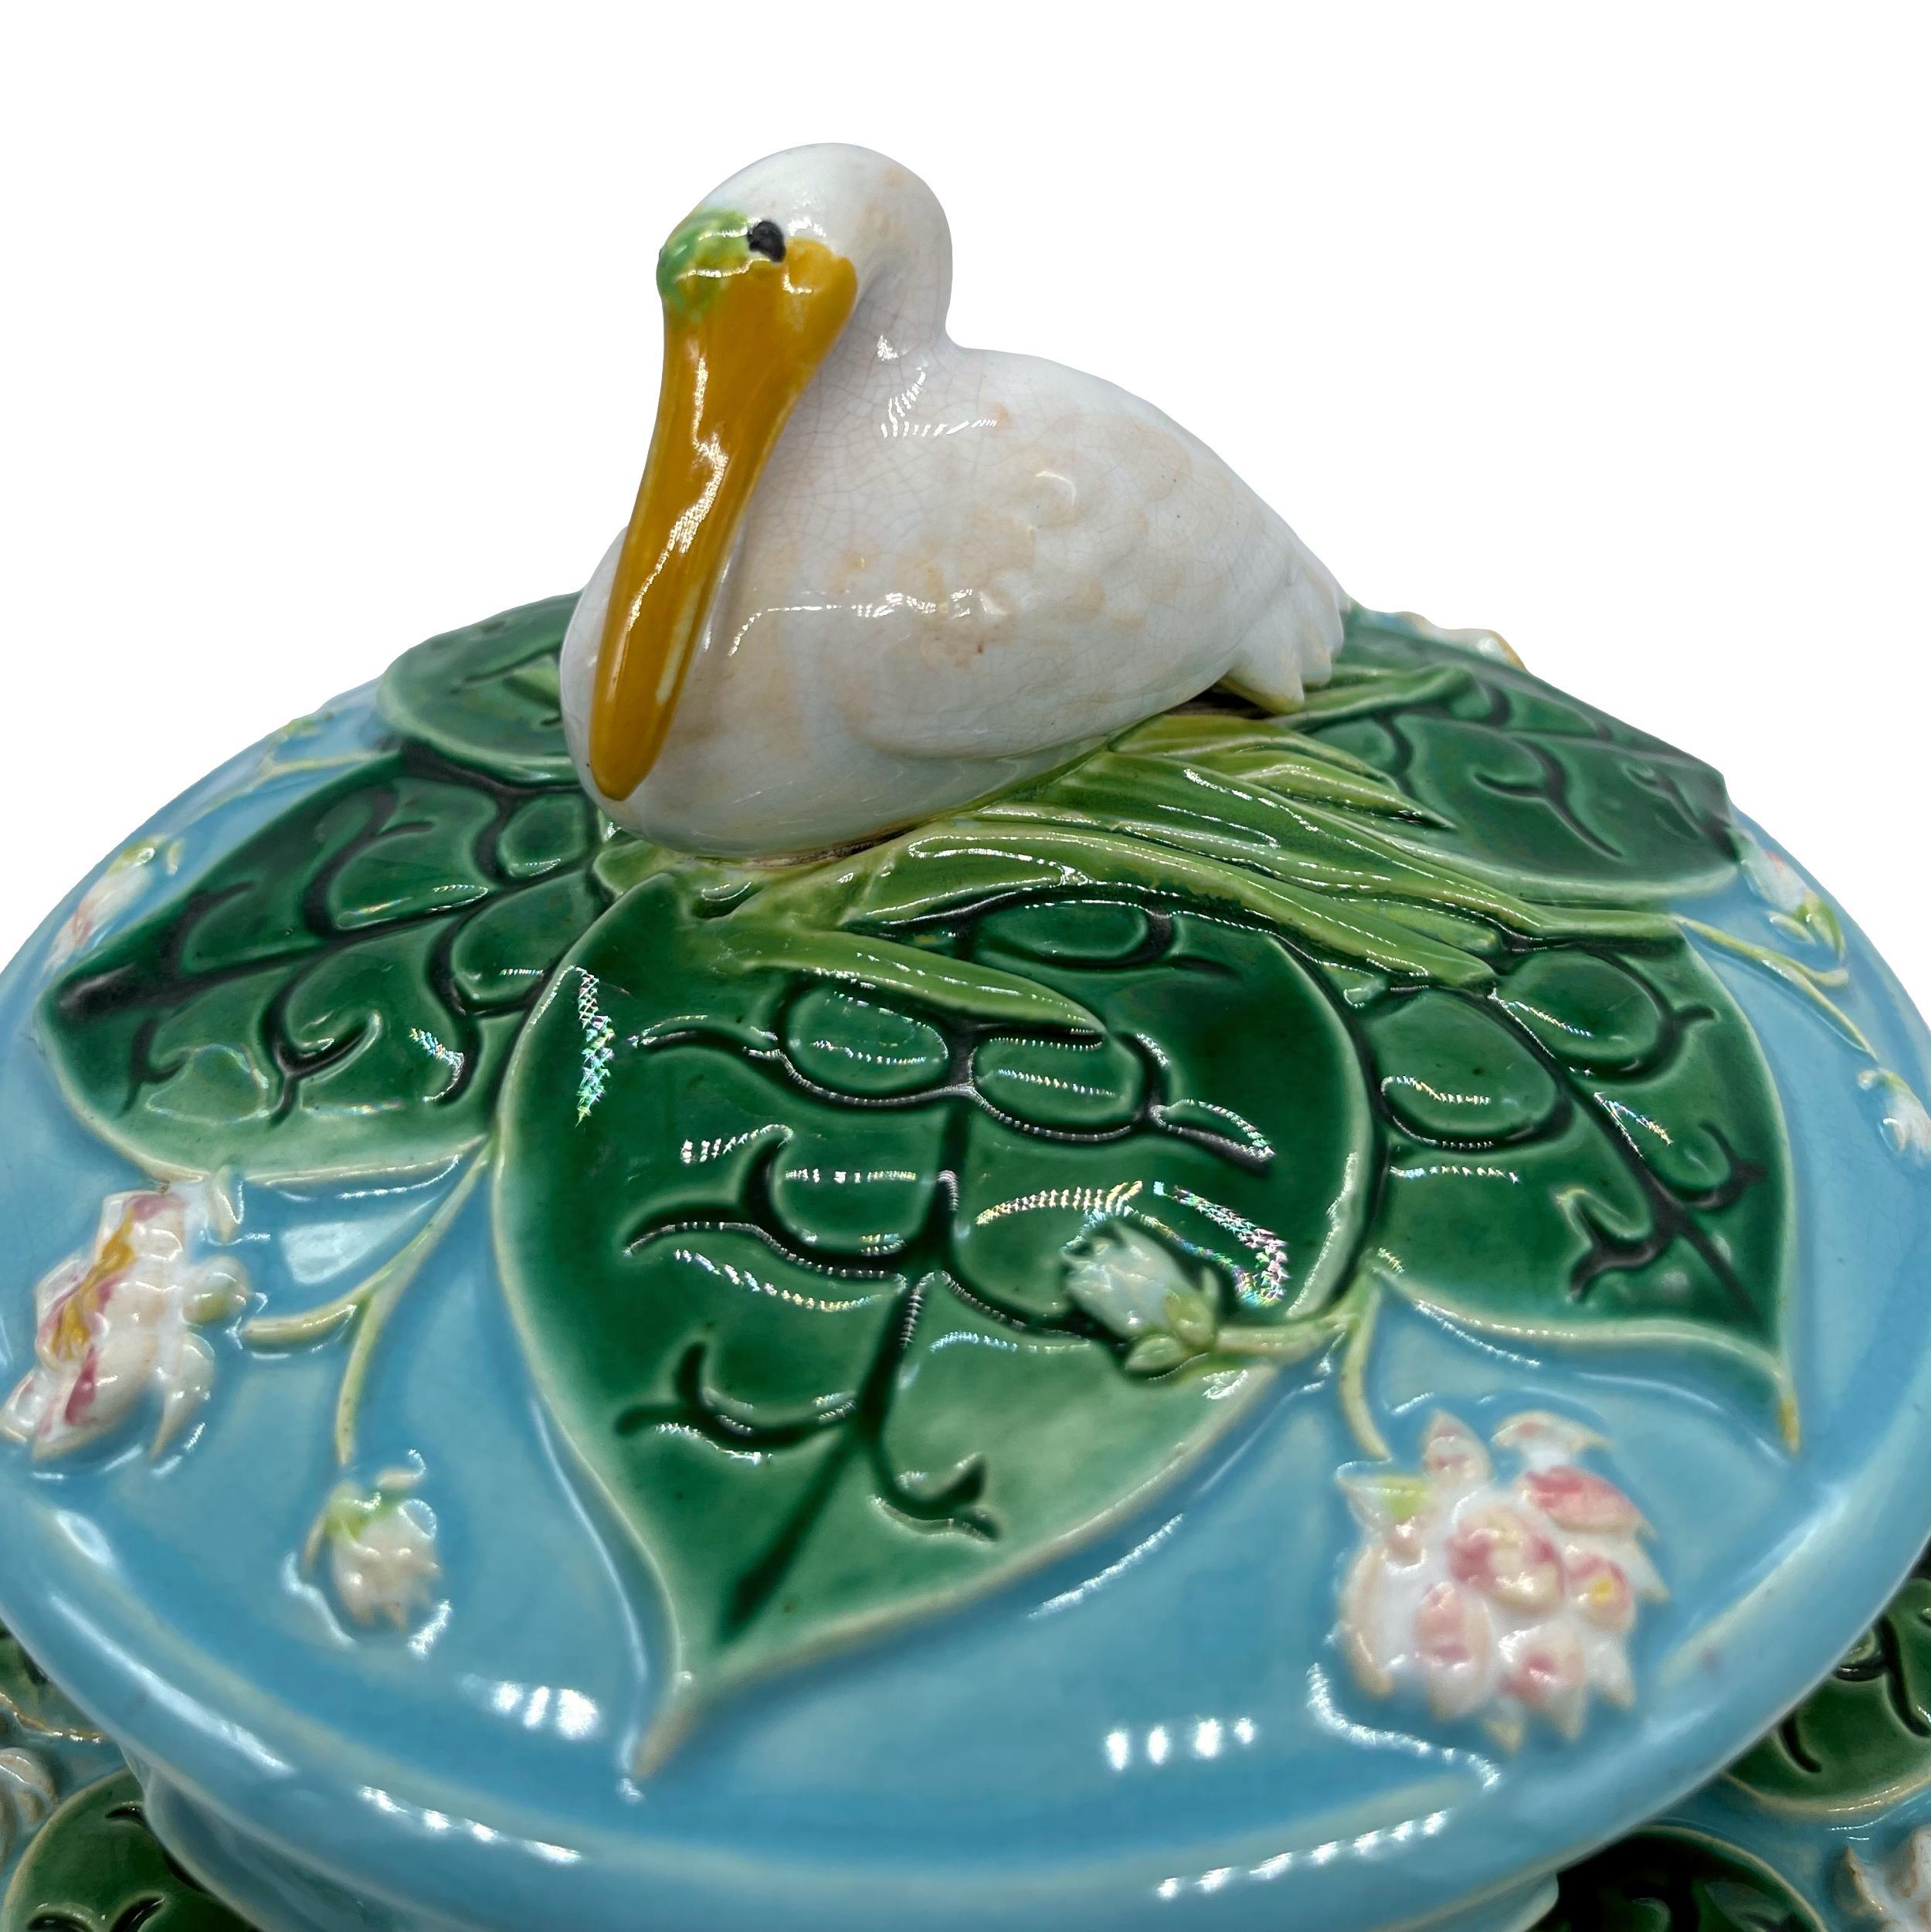 George Jones Majolica Pâté Server with Stand & Cover, 'Stork' Finial, Dated 1875 2